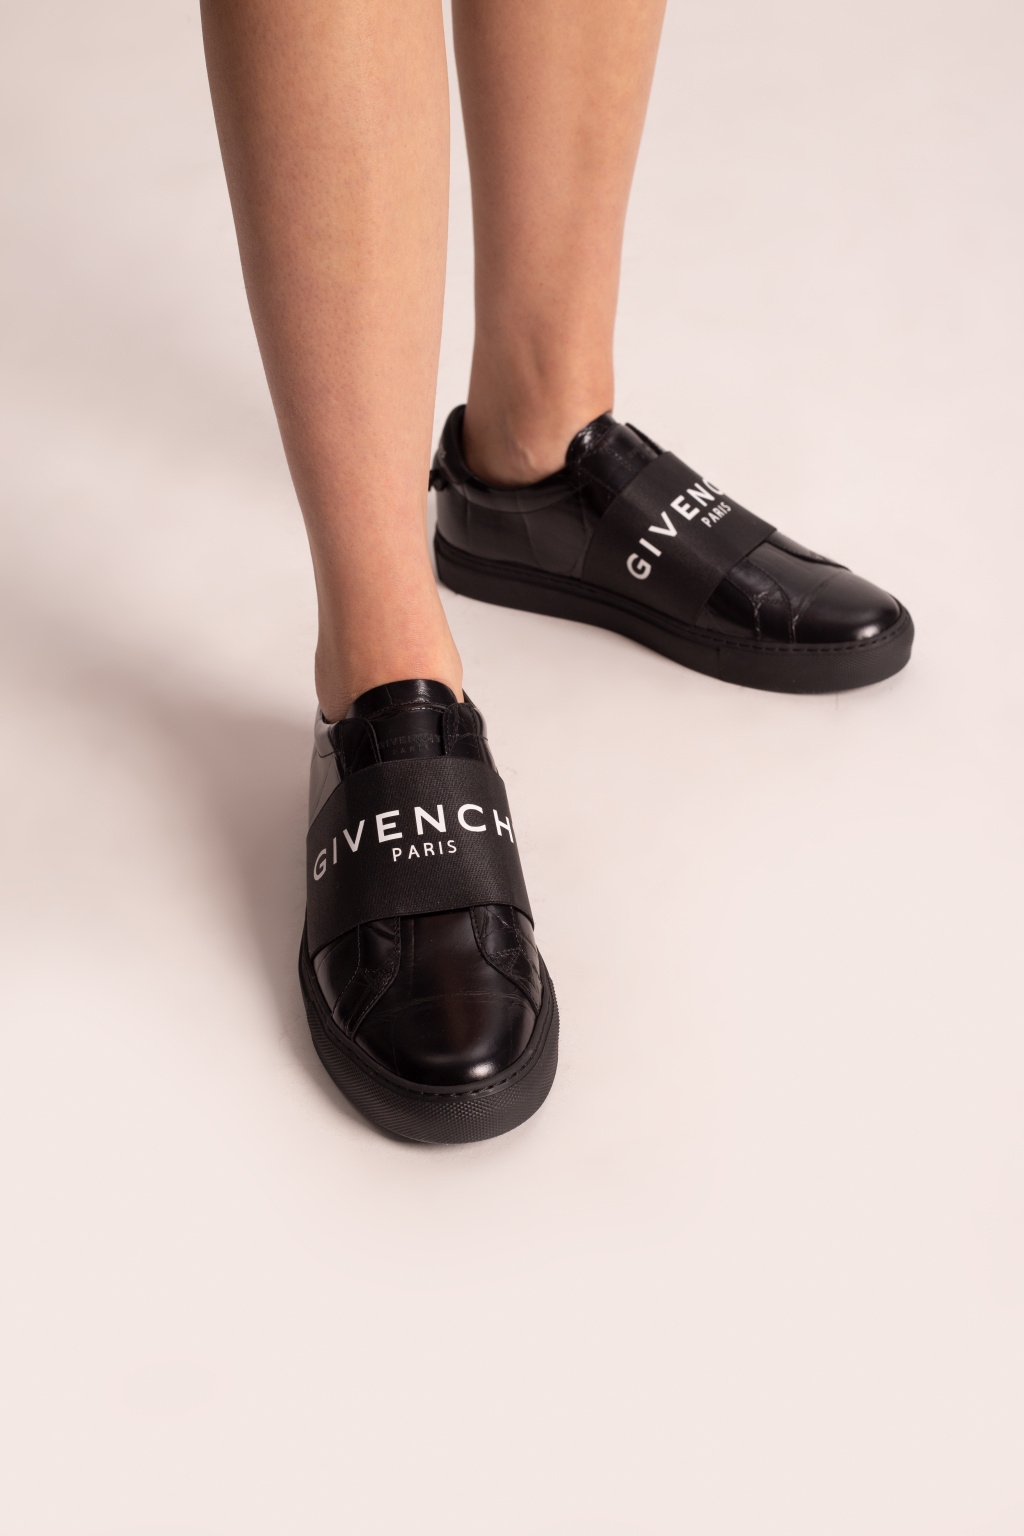 Givenchy ‘Urban Street’ sneakers with logo